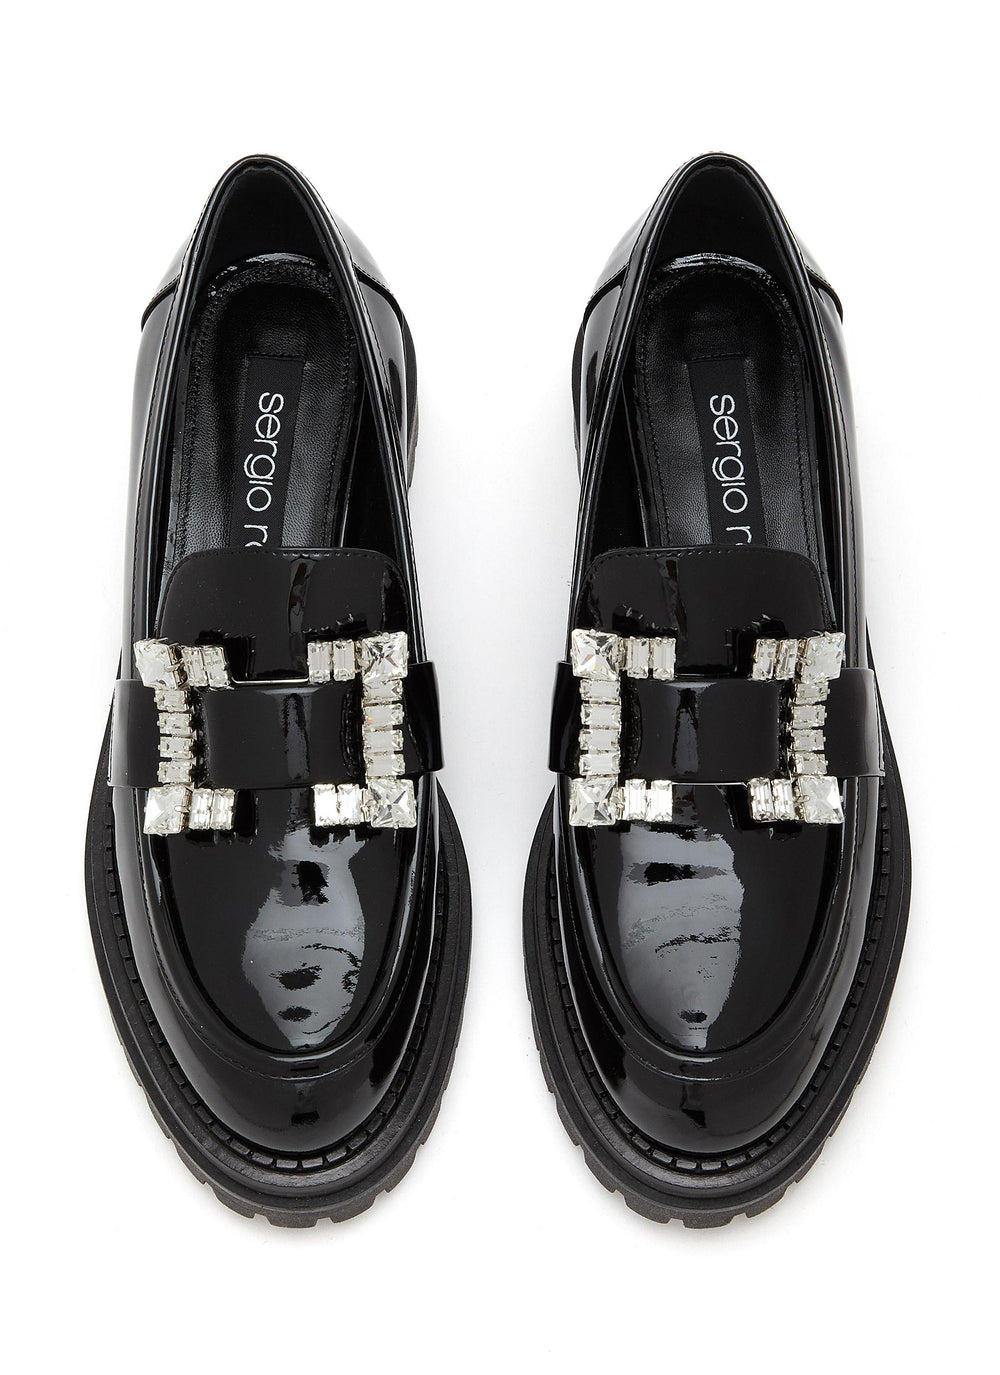 Sr Prince Pentent Leather Loafers - Sergio Rossi - Liberty Shoes Australia